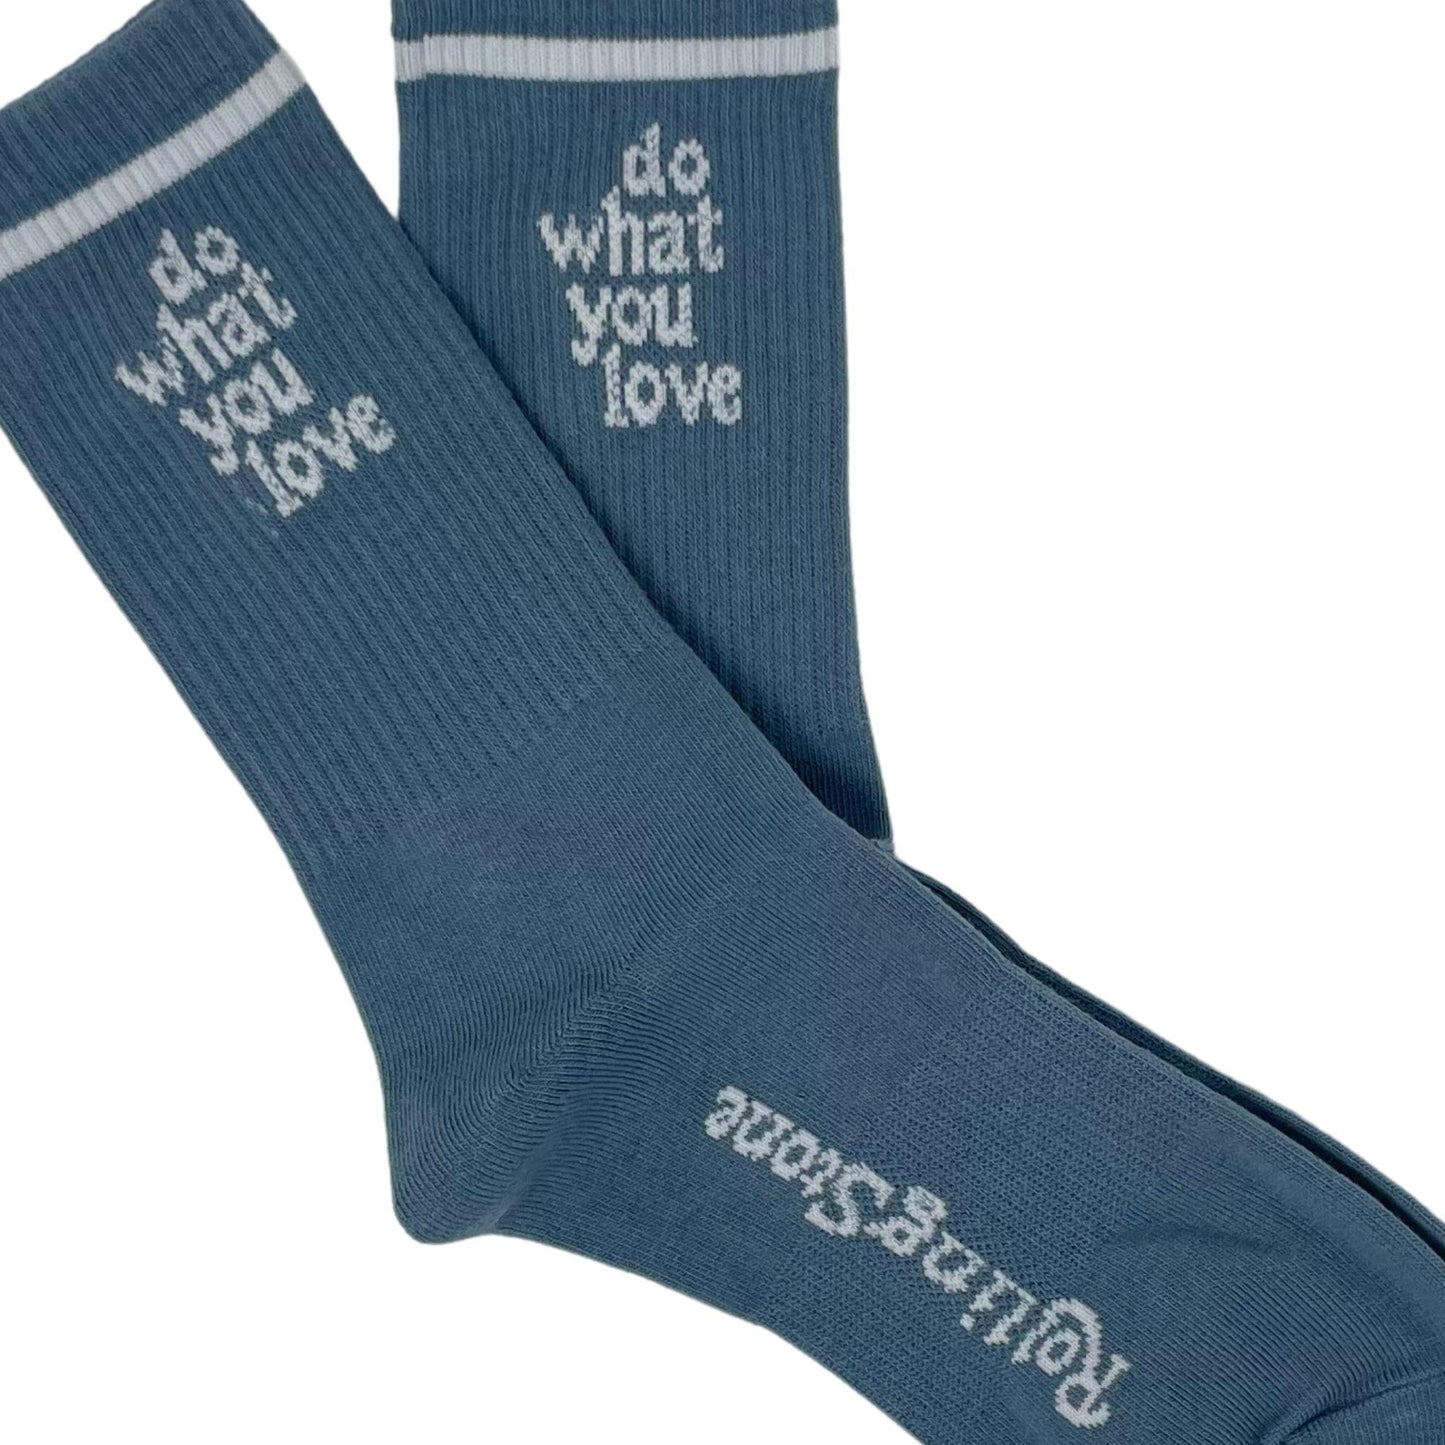 Calcetines Do what you love Rolling Stone